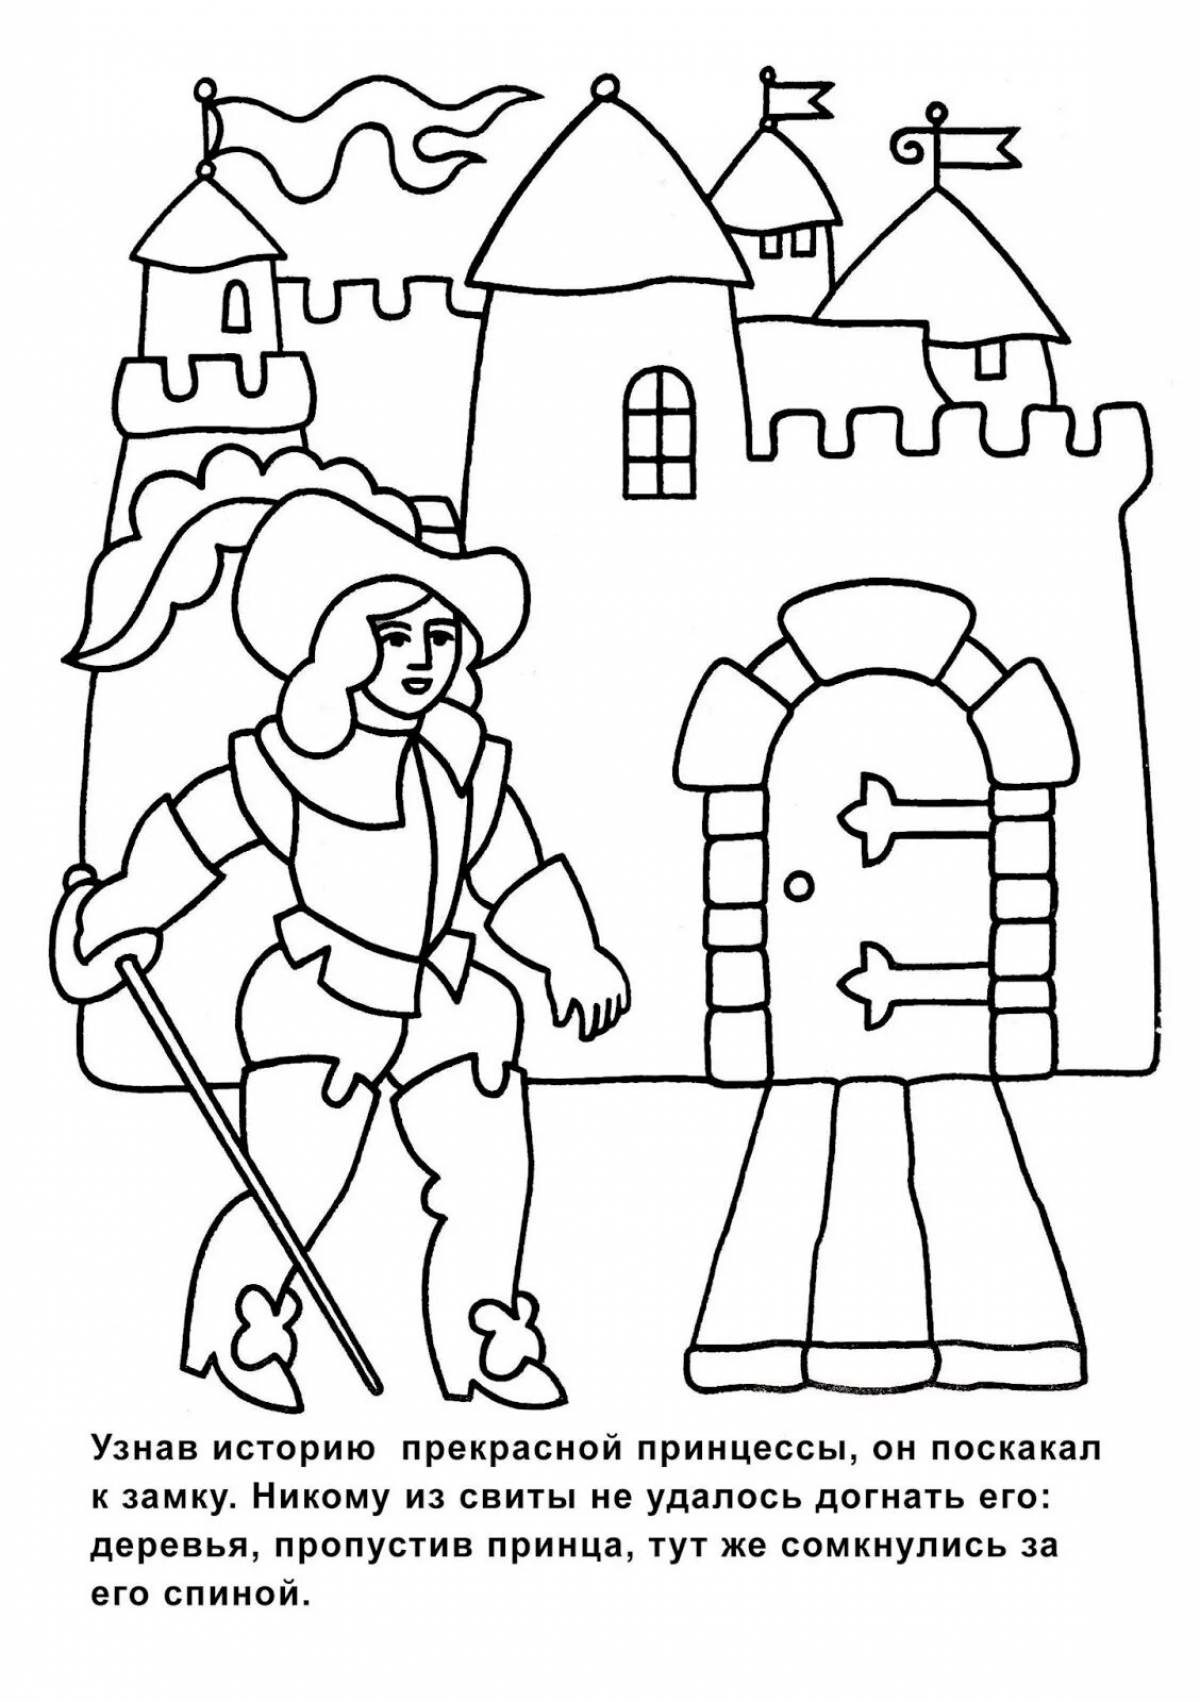 Sh perro's intriguing coloring page